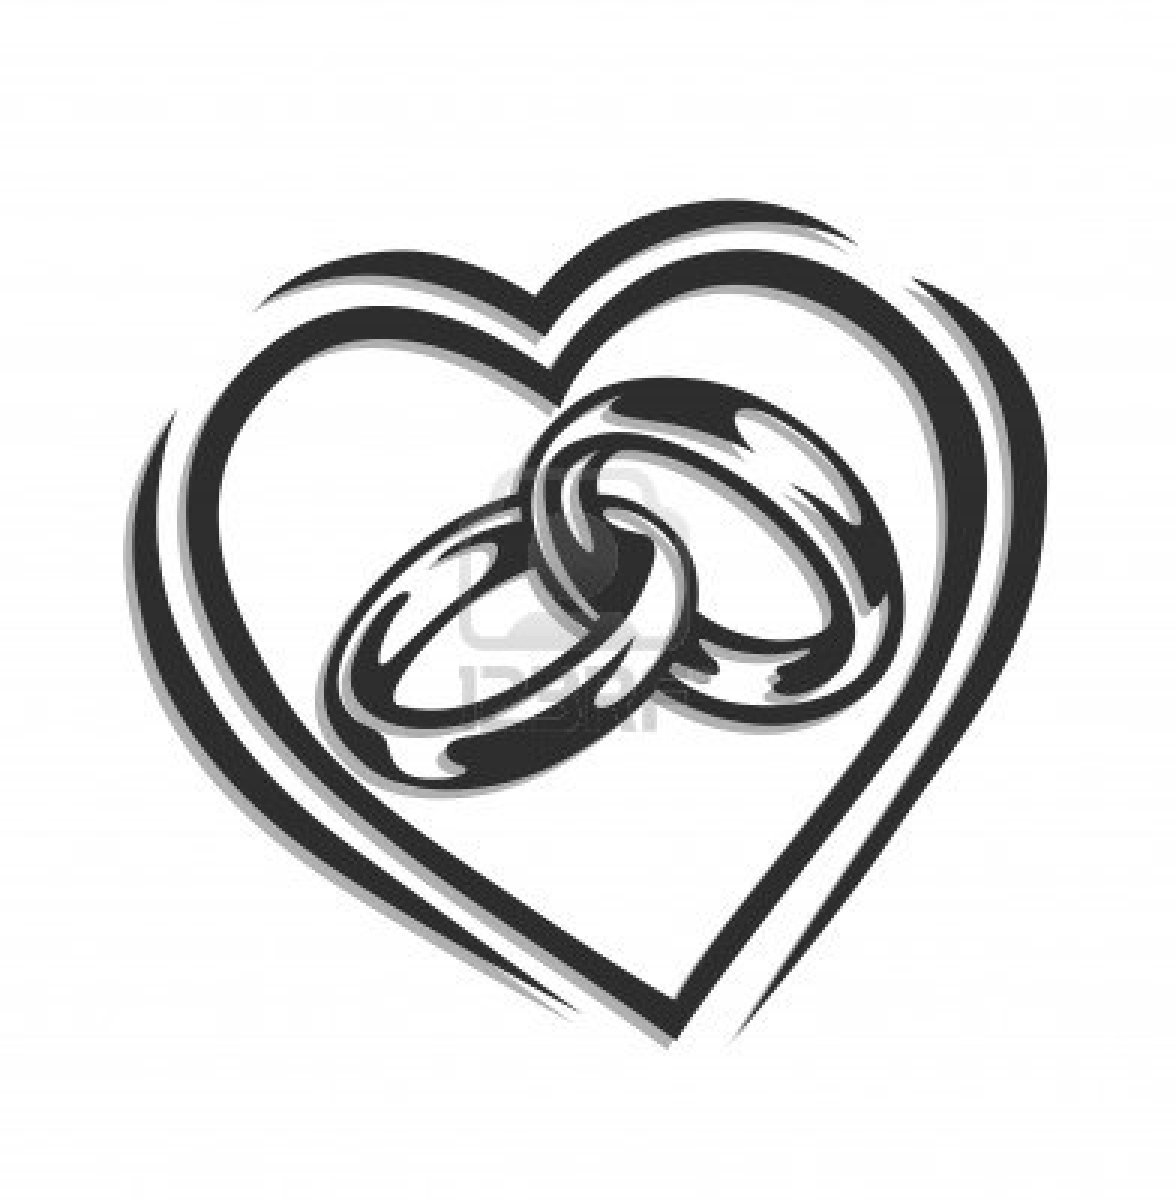 Linked Wedding Rings Clipart Wedding Ring Clipart Jewelry Shopping